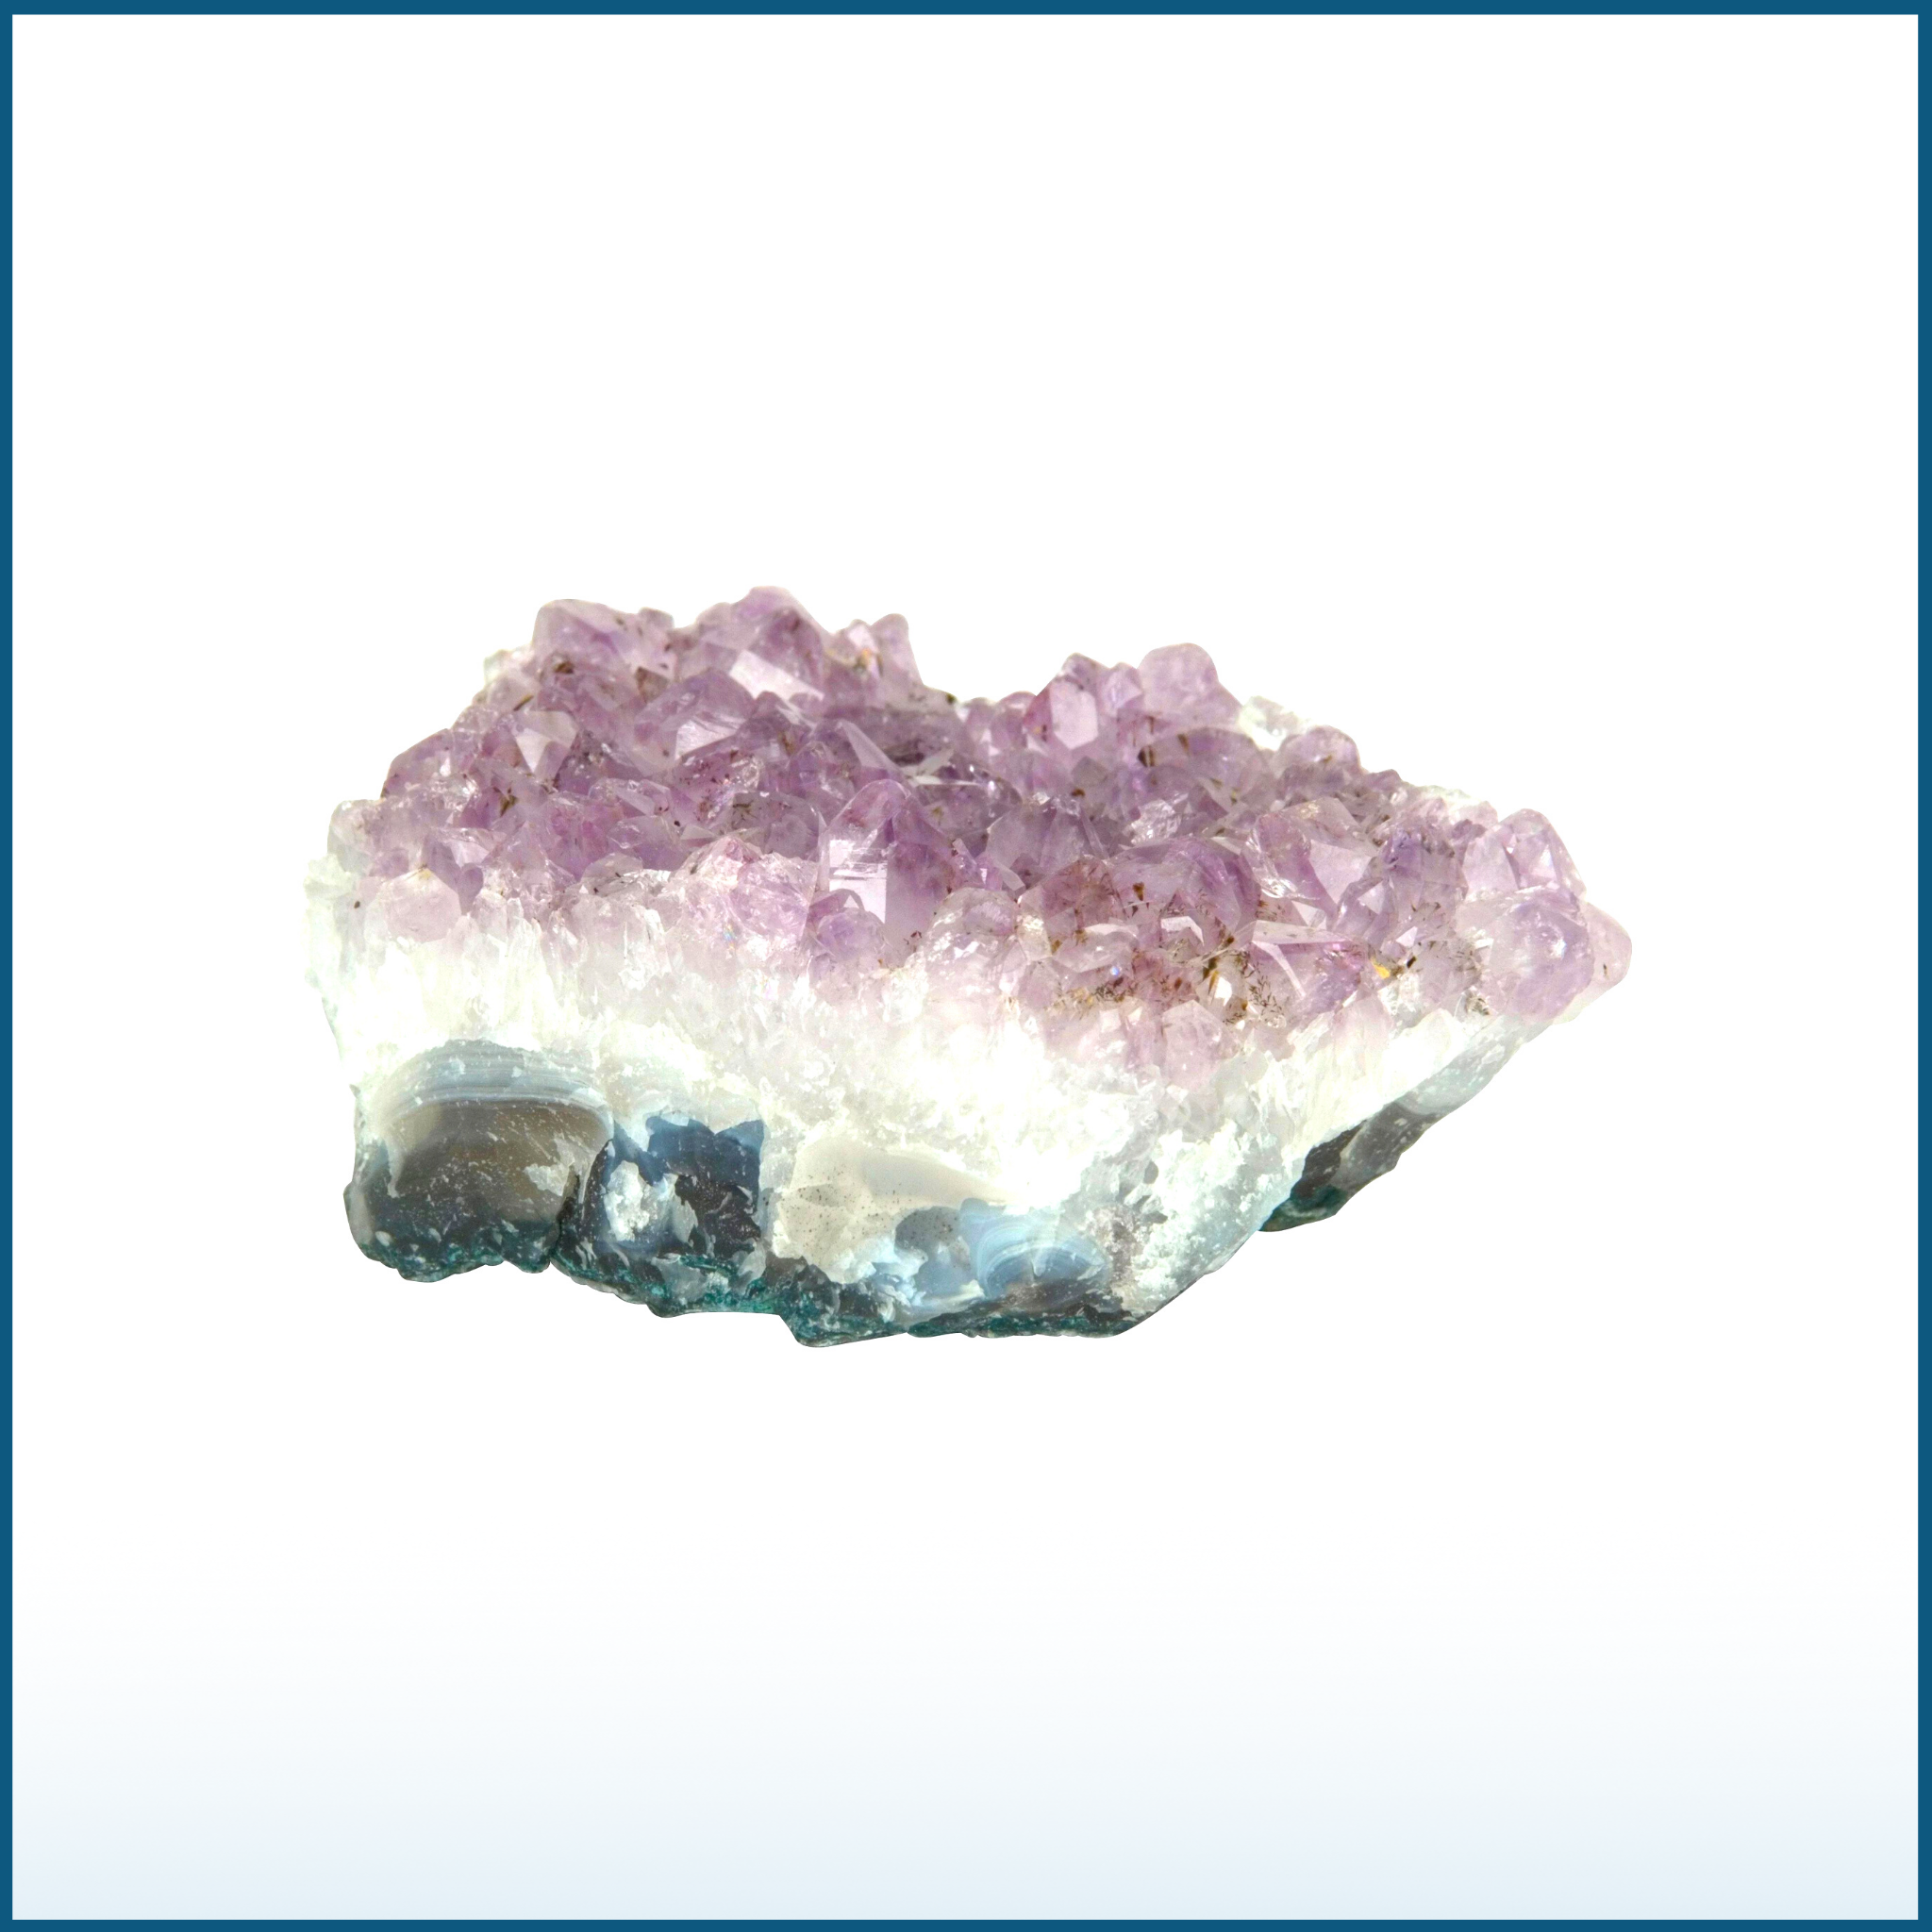 Enhance Your Space with Stunning Amethyst Clusters - Natural Healing Crystals for Positive Energy and Décor